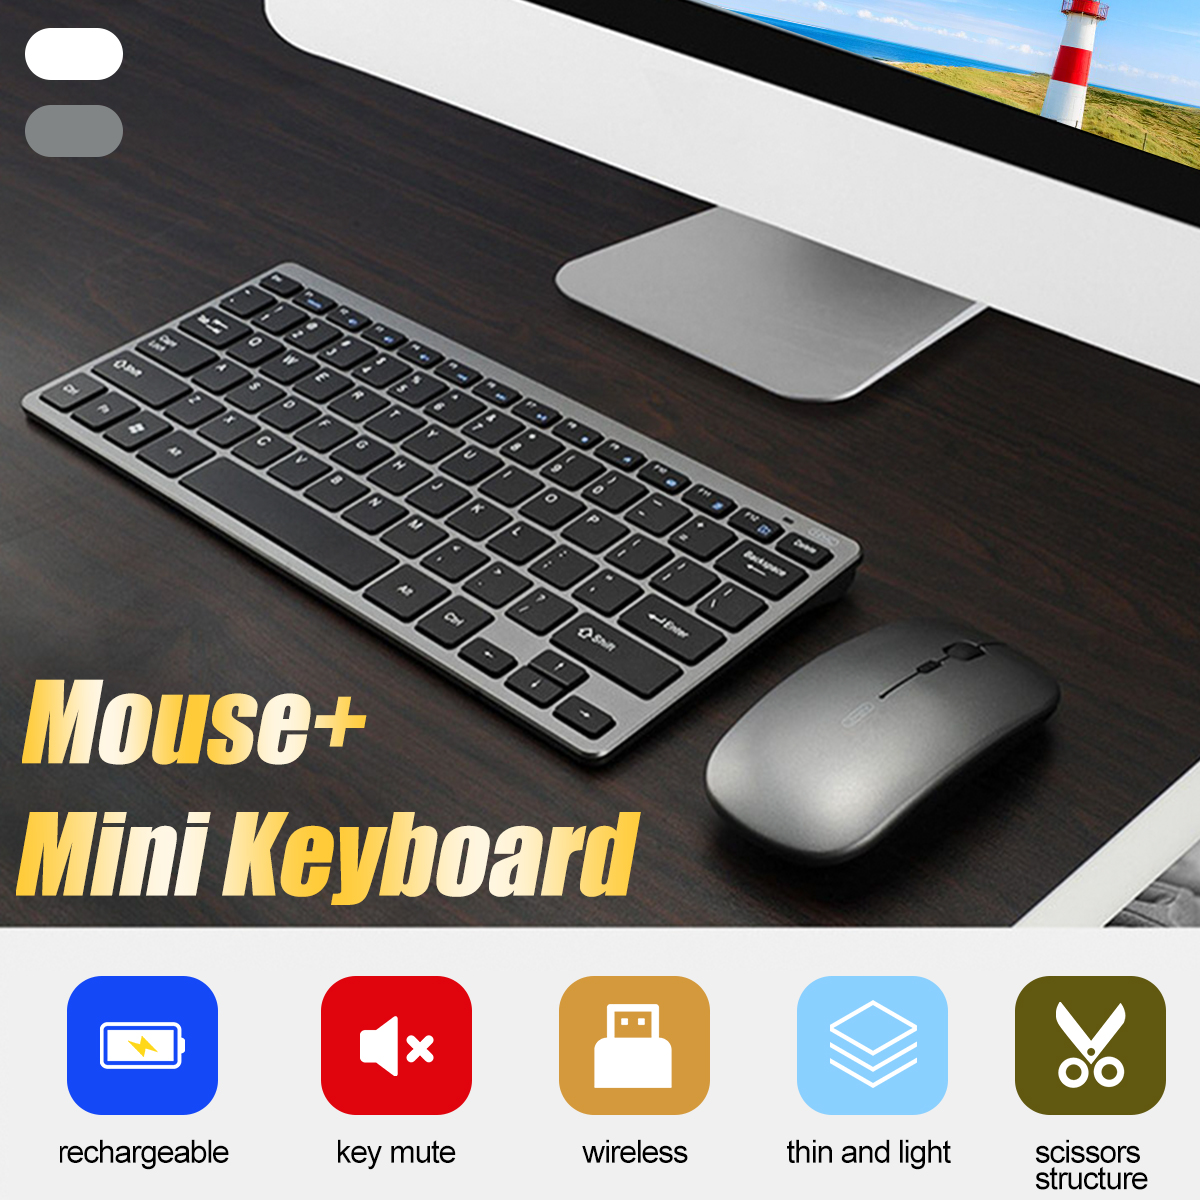 24G-Wireless-Rechargeable-USB-Receiver-Silent-Gaming-Keyboard-Mouse-Kit-Sets-for-Macbook-1750280-1